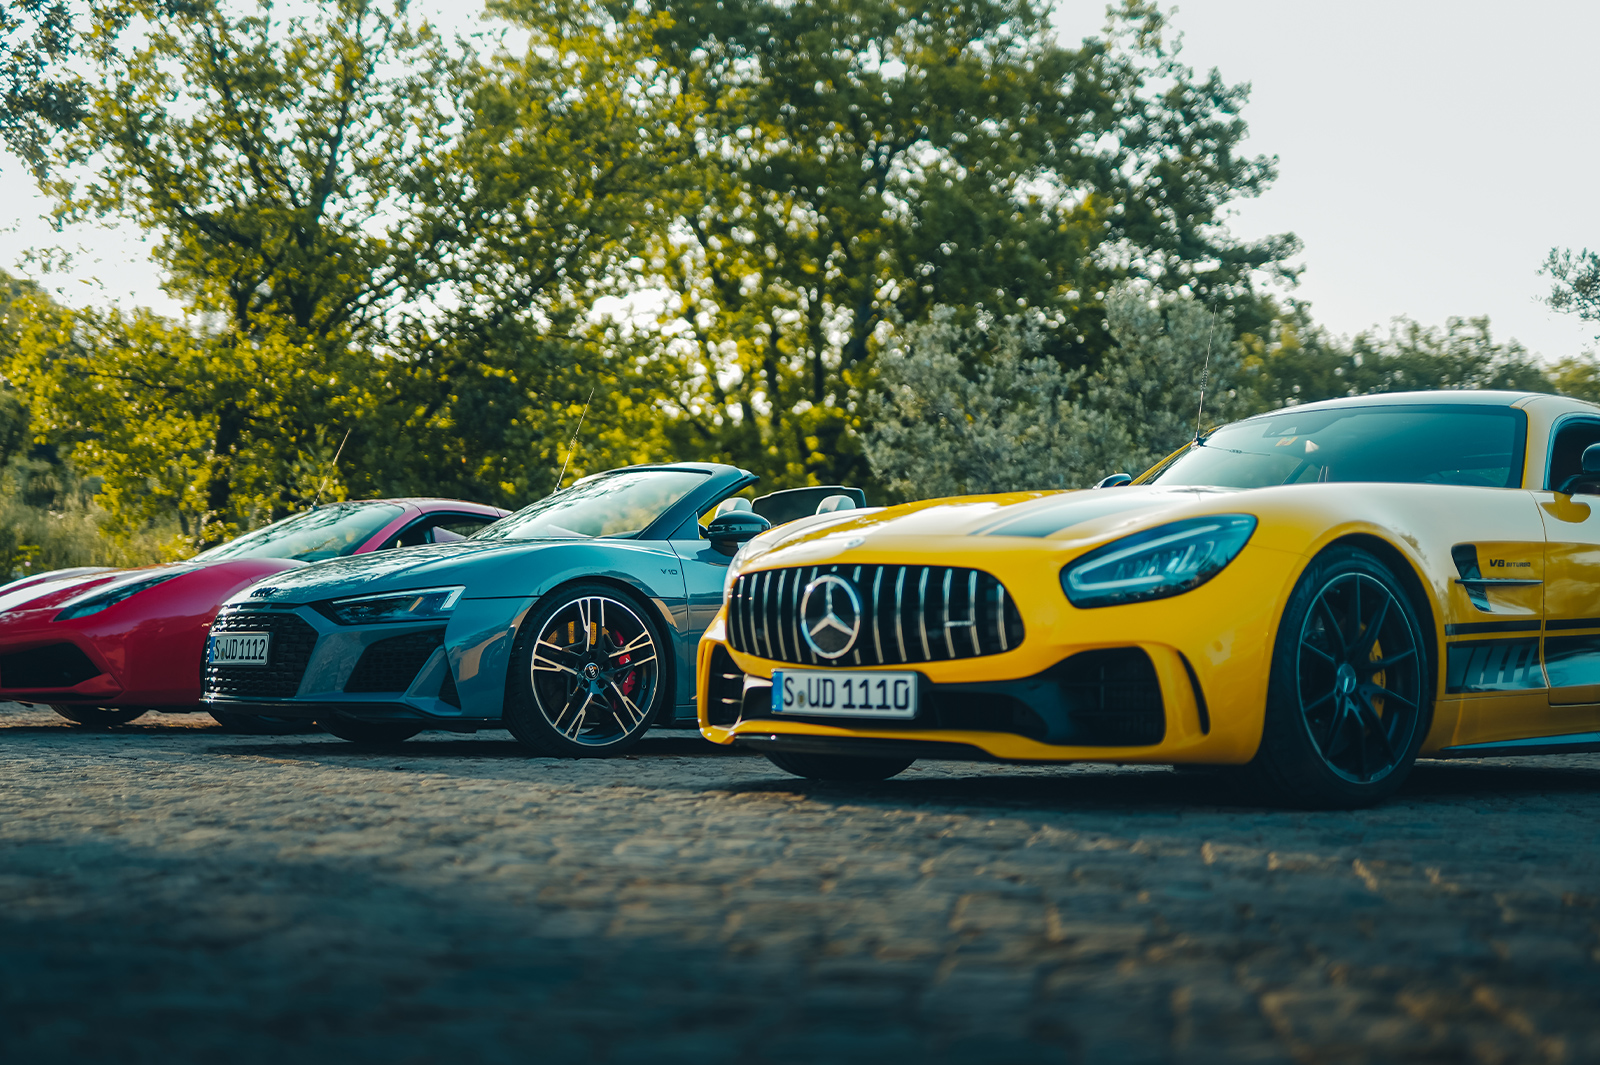 A trio of supercars in red, yellow and blue awaiting Ultimate Driving Tours’ guests